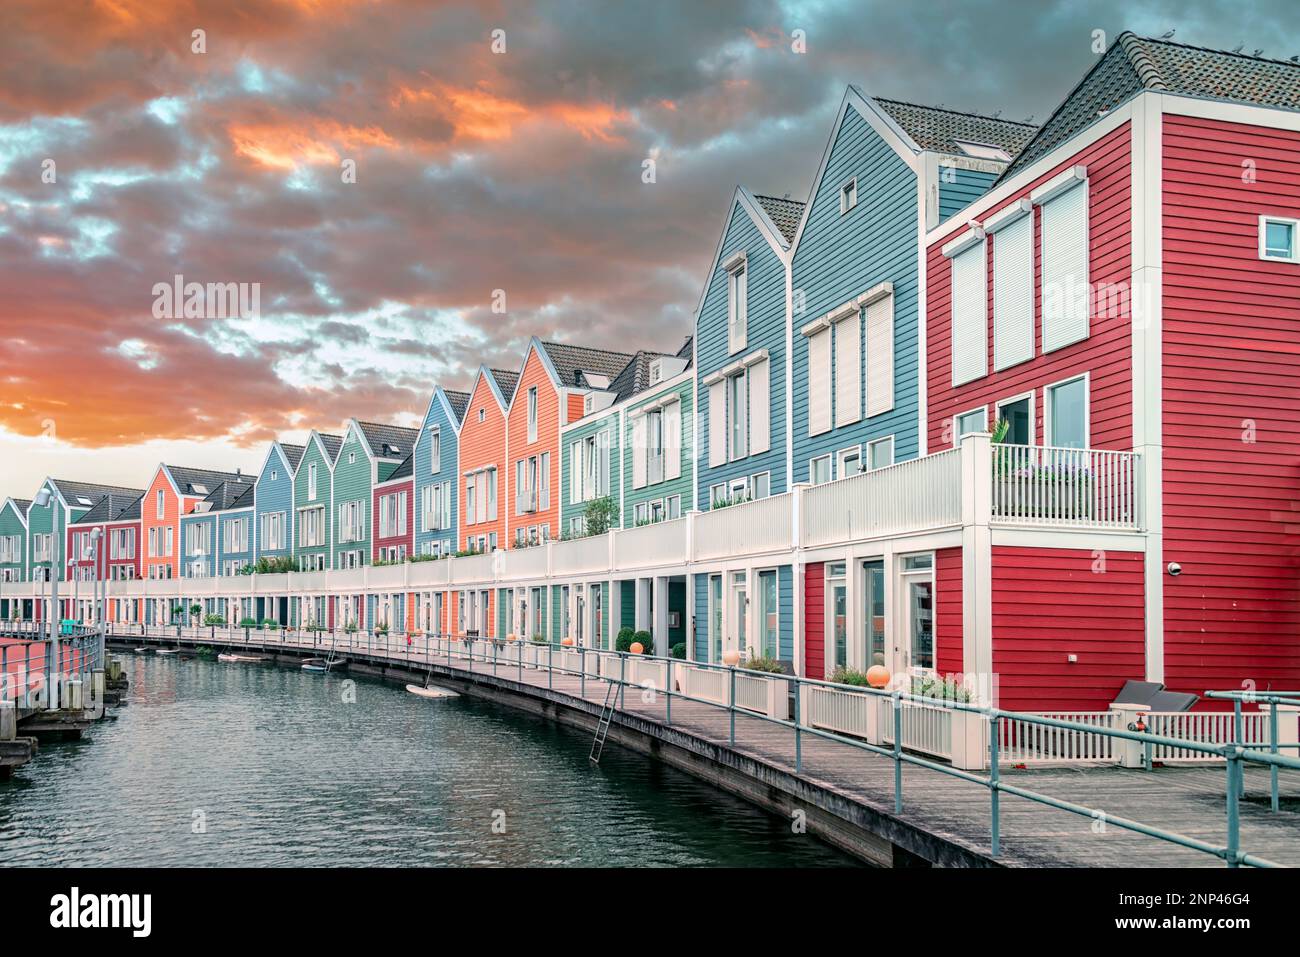 Colorful wooden houses in Holland Stock Photo